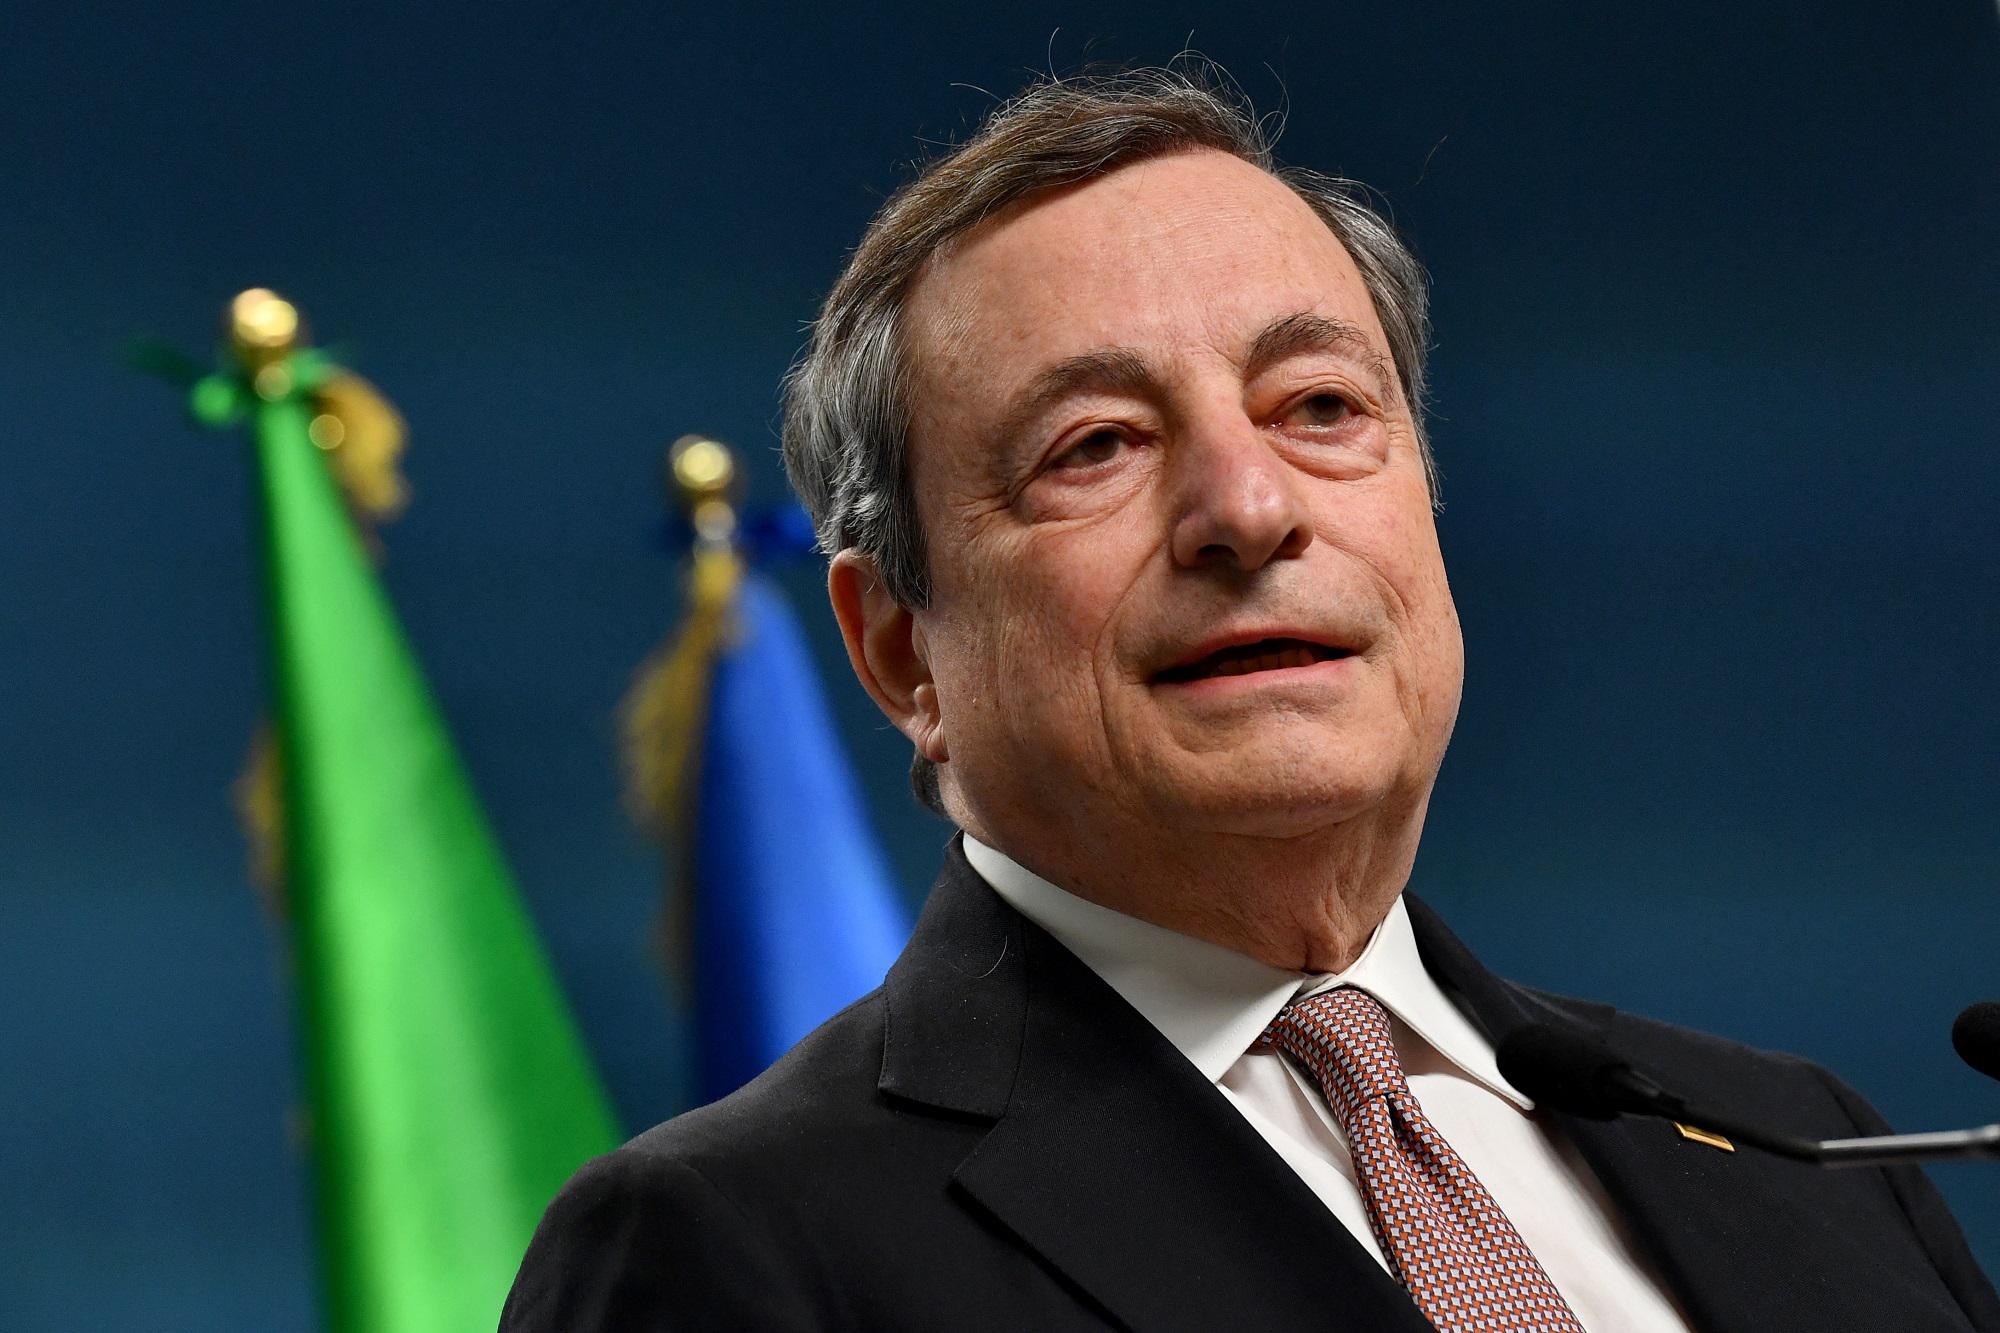 Draghi Takes Charge as One of the Few Leaders Prepared for Reform